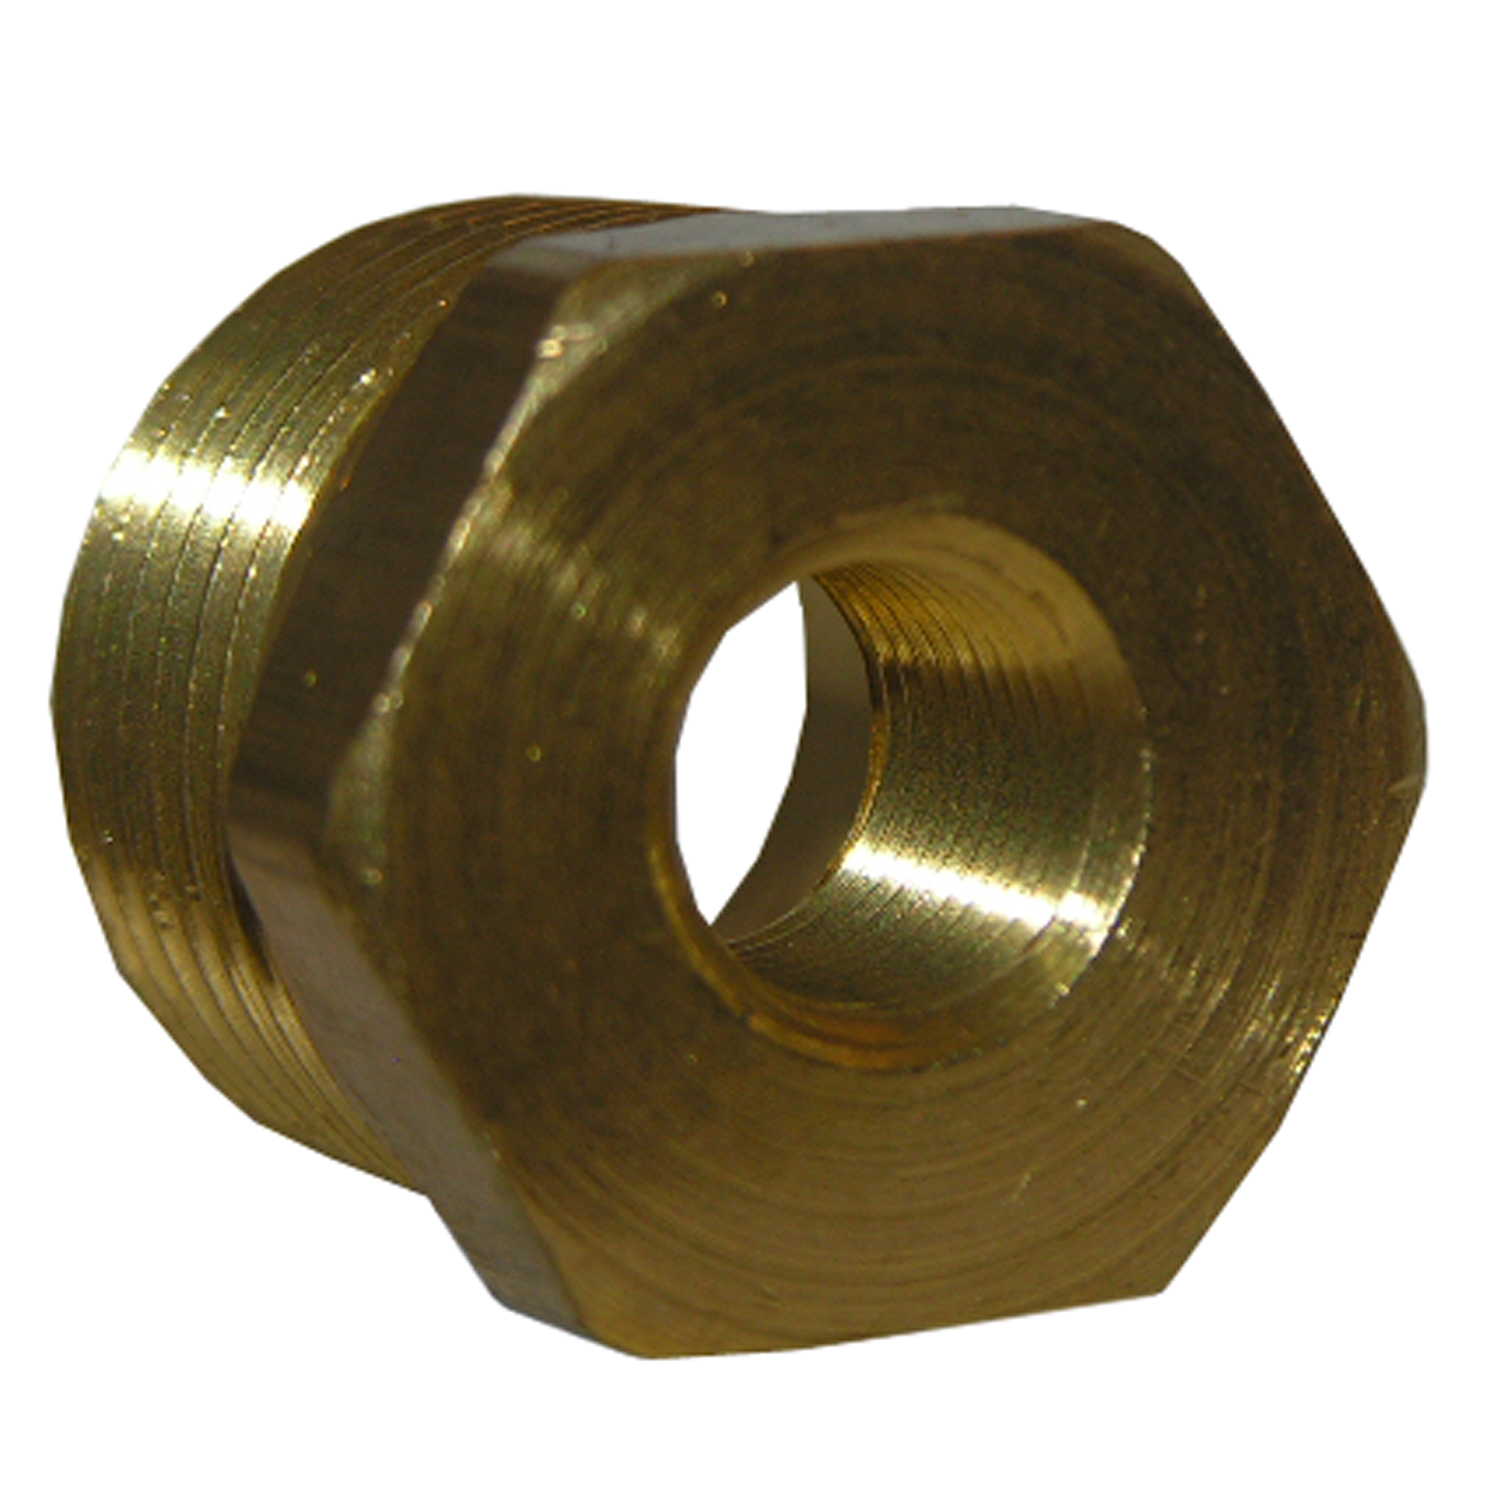 17-9249 Hex Pipe Bushing, 1/2 x 1/4 in, MPT x FPT, Brass, 125 psi Pressure